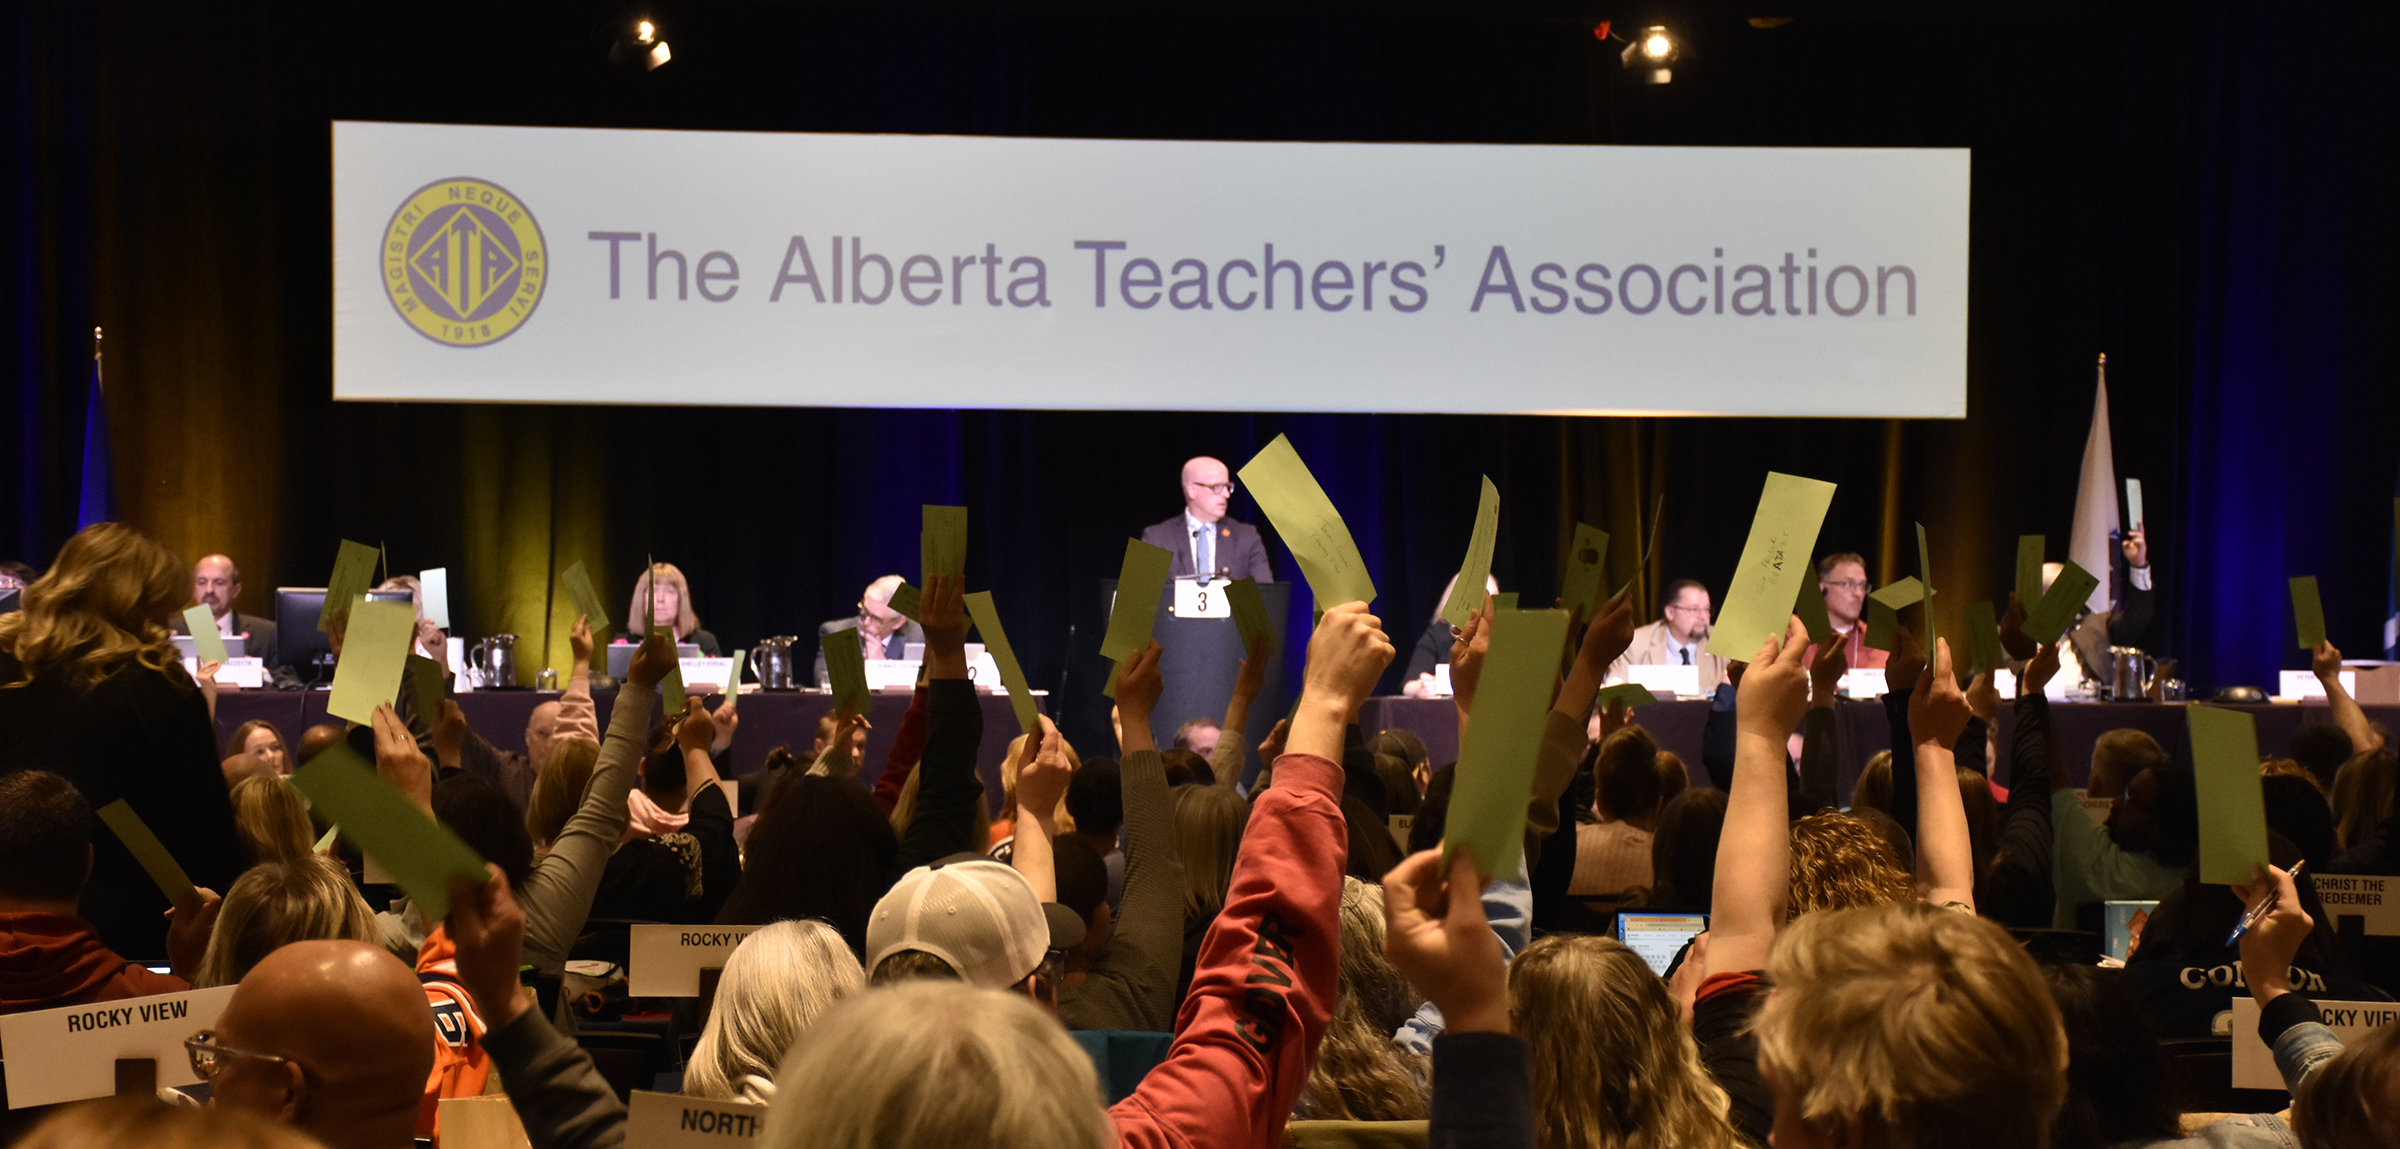 ARA attendees hold up voting signs